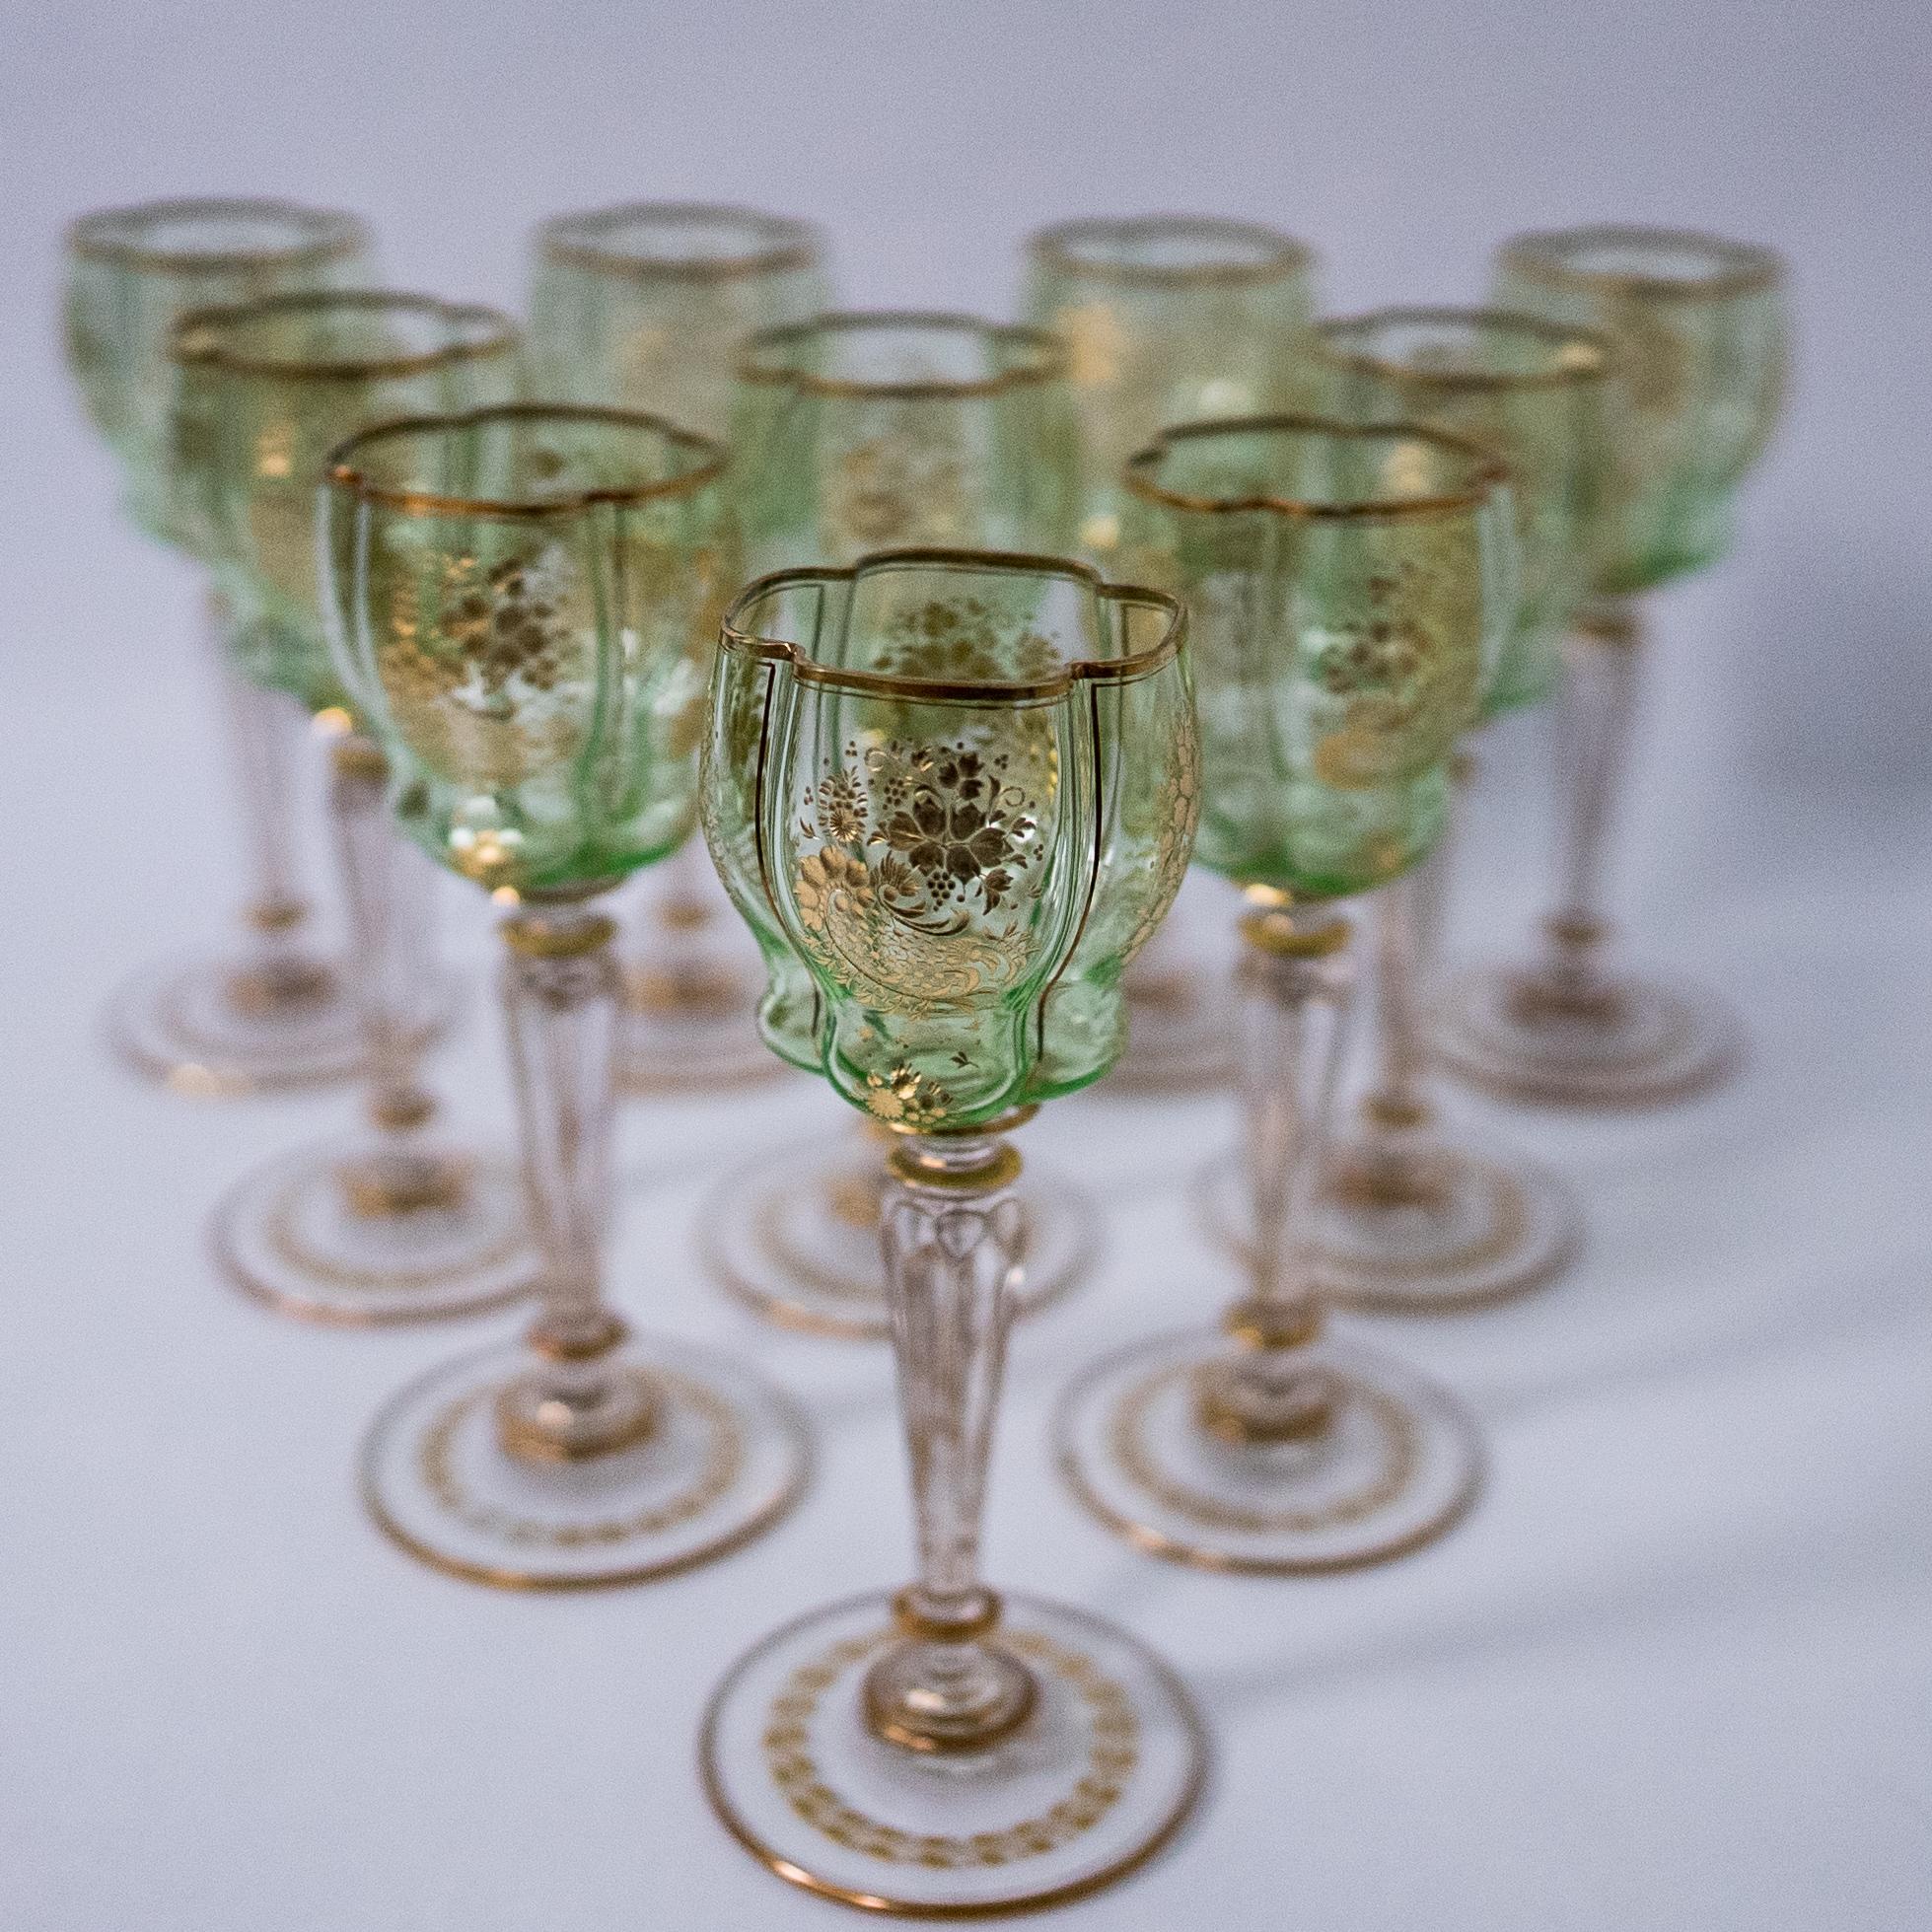 Late 19th Century 10 Antique Moser Green Cut and Gilt Wine Goblets, circa 1880